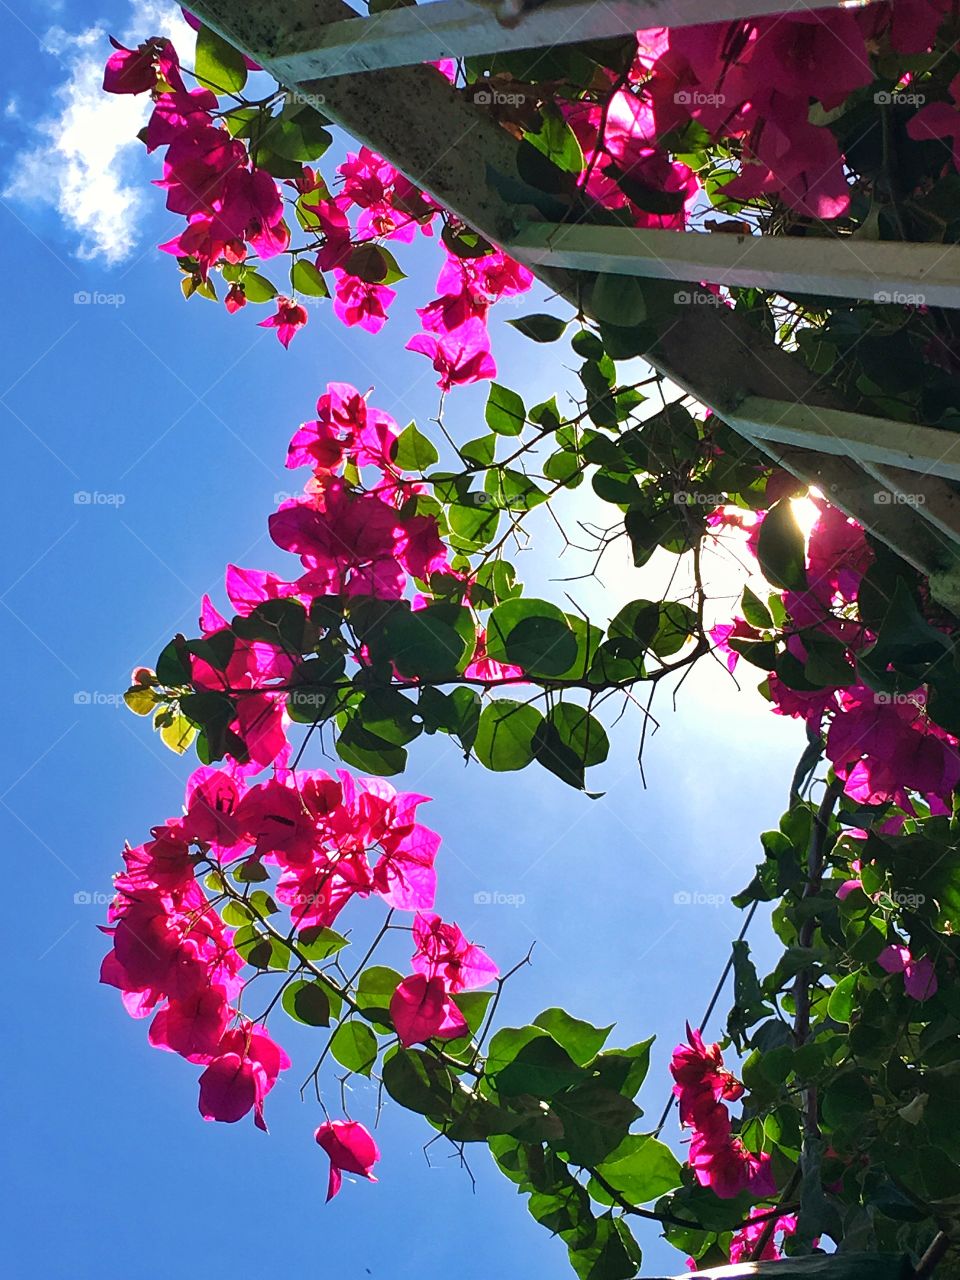 Flowers in the sky